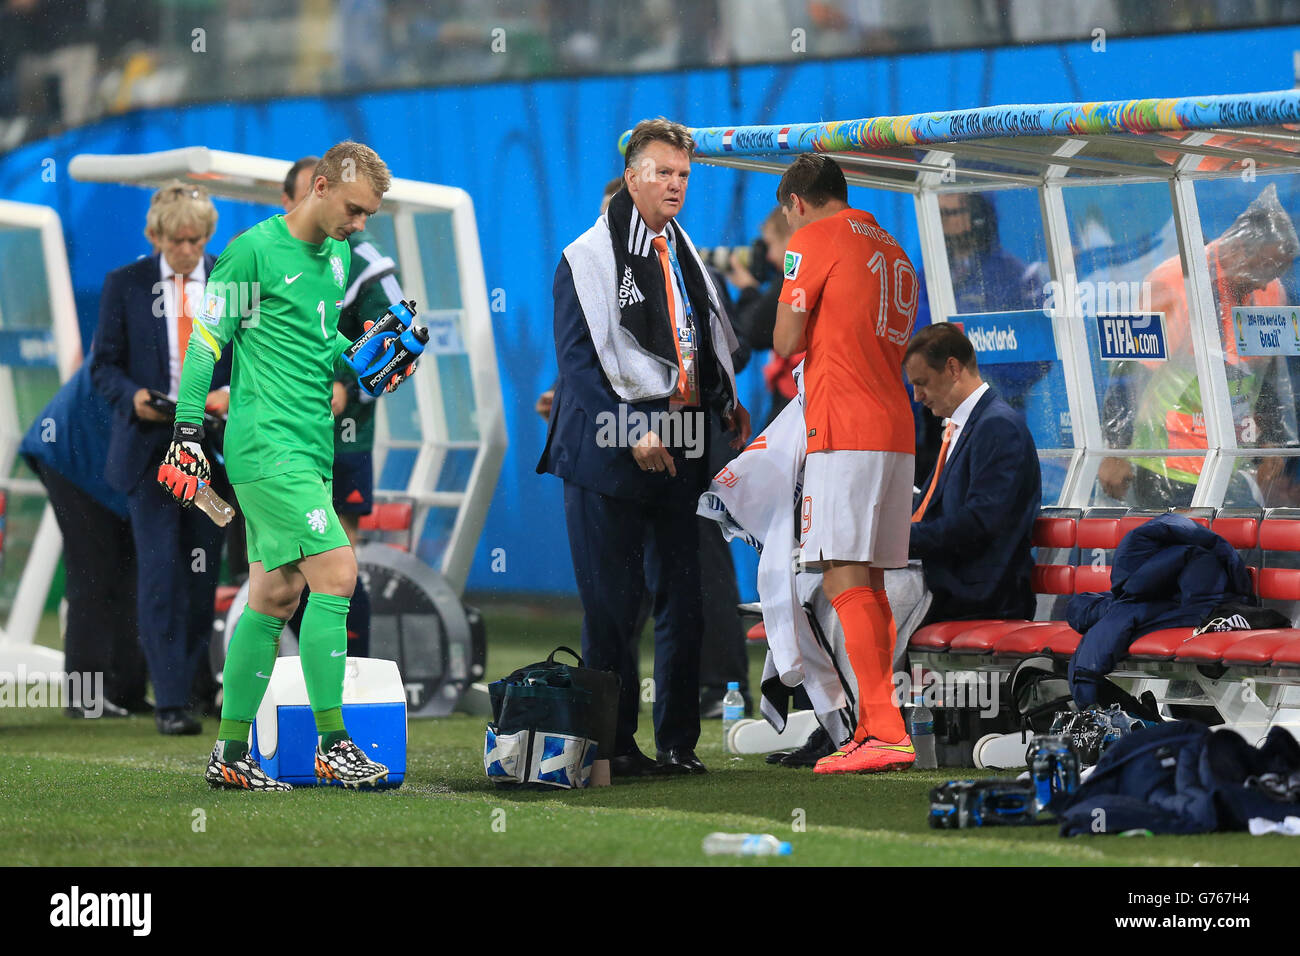 Netherlands manager Louis van Gaal looks to prepare to bring on Klaas Jan Huntelaar (right) as goalkeeper Jasper Cillessen appears to walk off the pitch, before the period of extra time begins during the FIFA World Cup Semi Final at the Arena de Sao Paulo, Sao Paulo, Brazil. Stock Photo